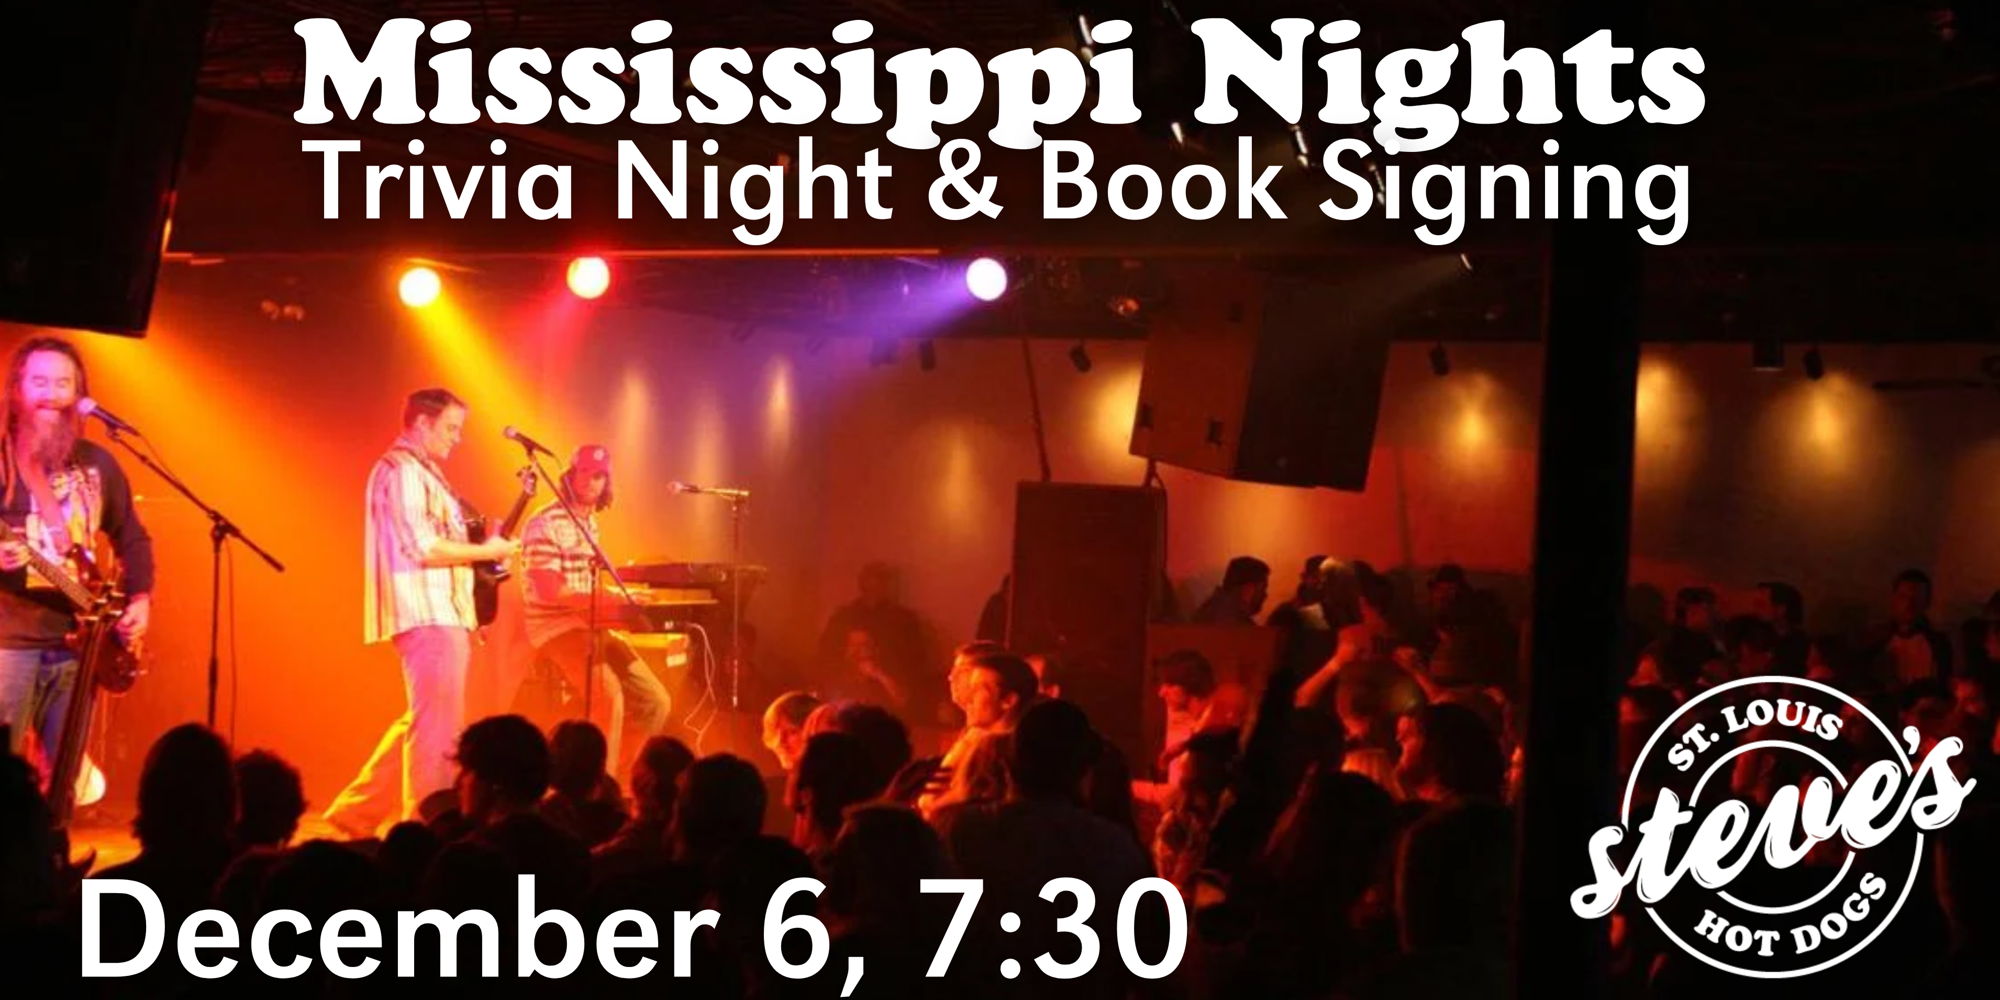 Mississippi Nights Trivia Night & Book Signing promotional image